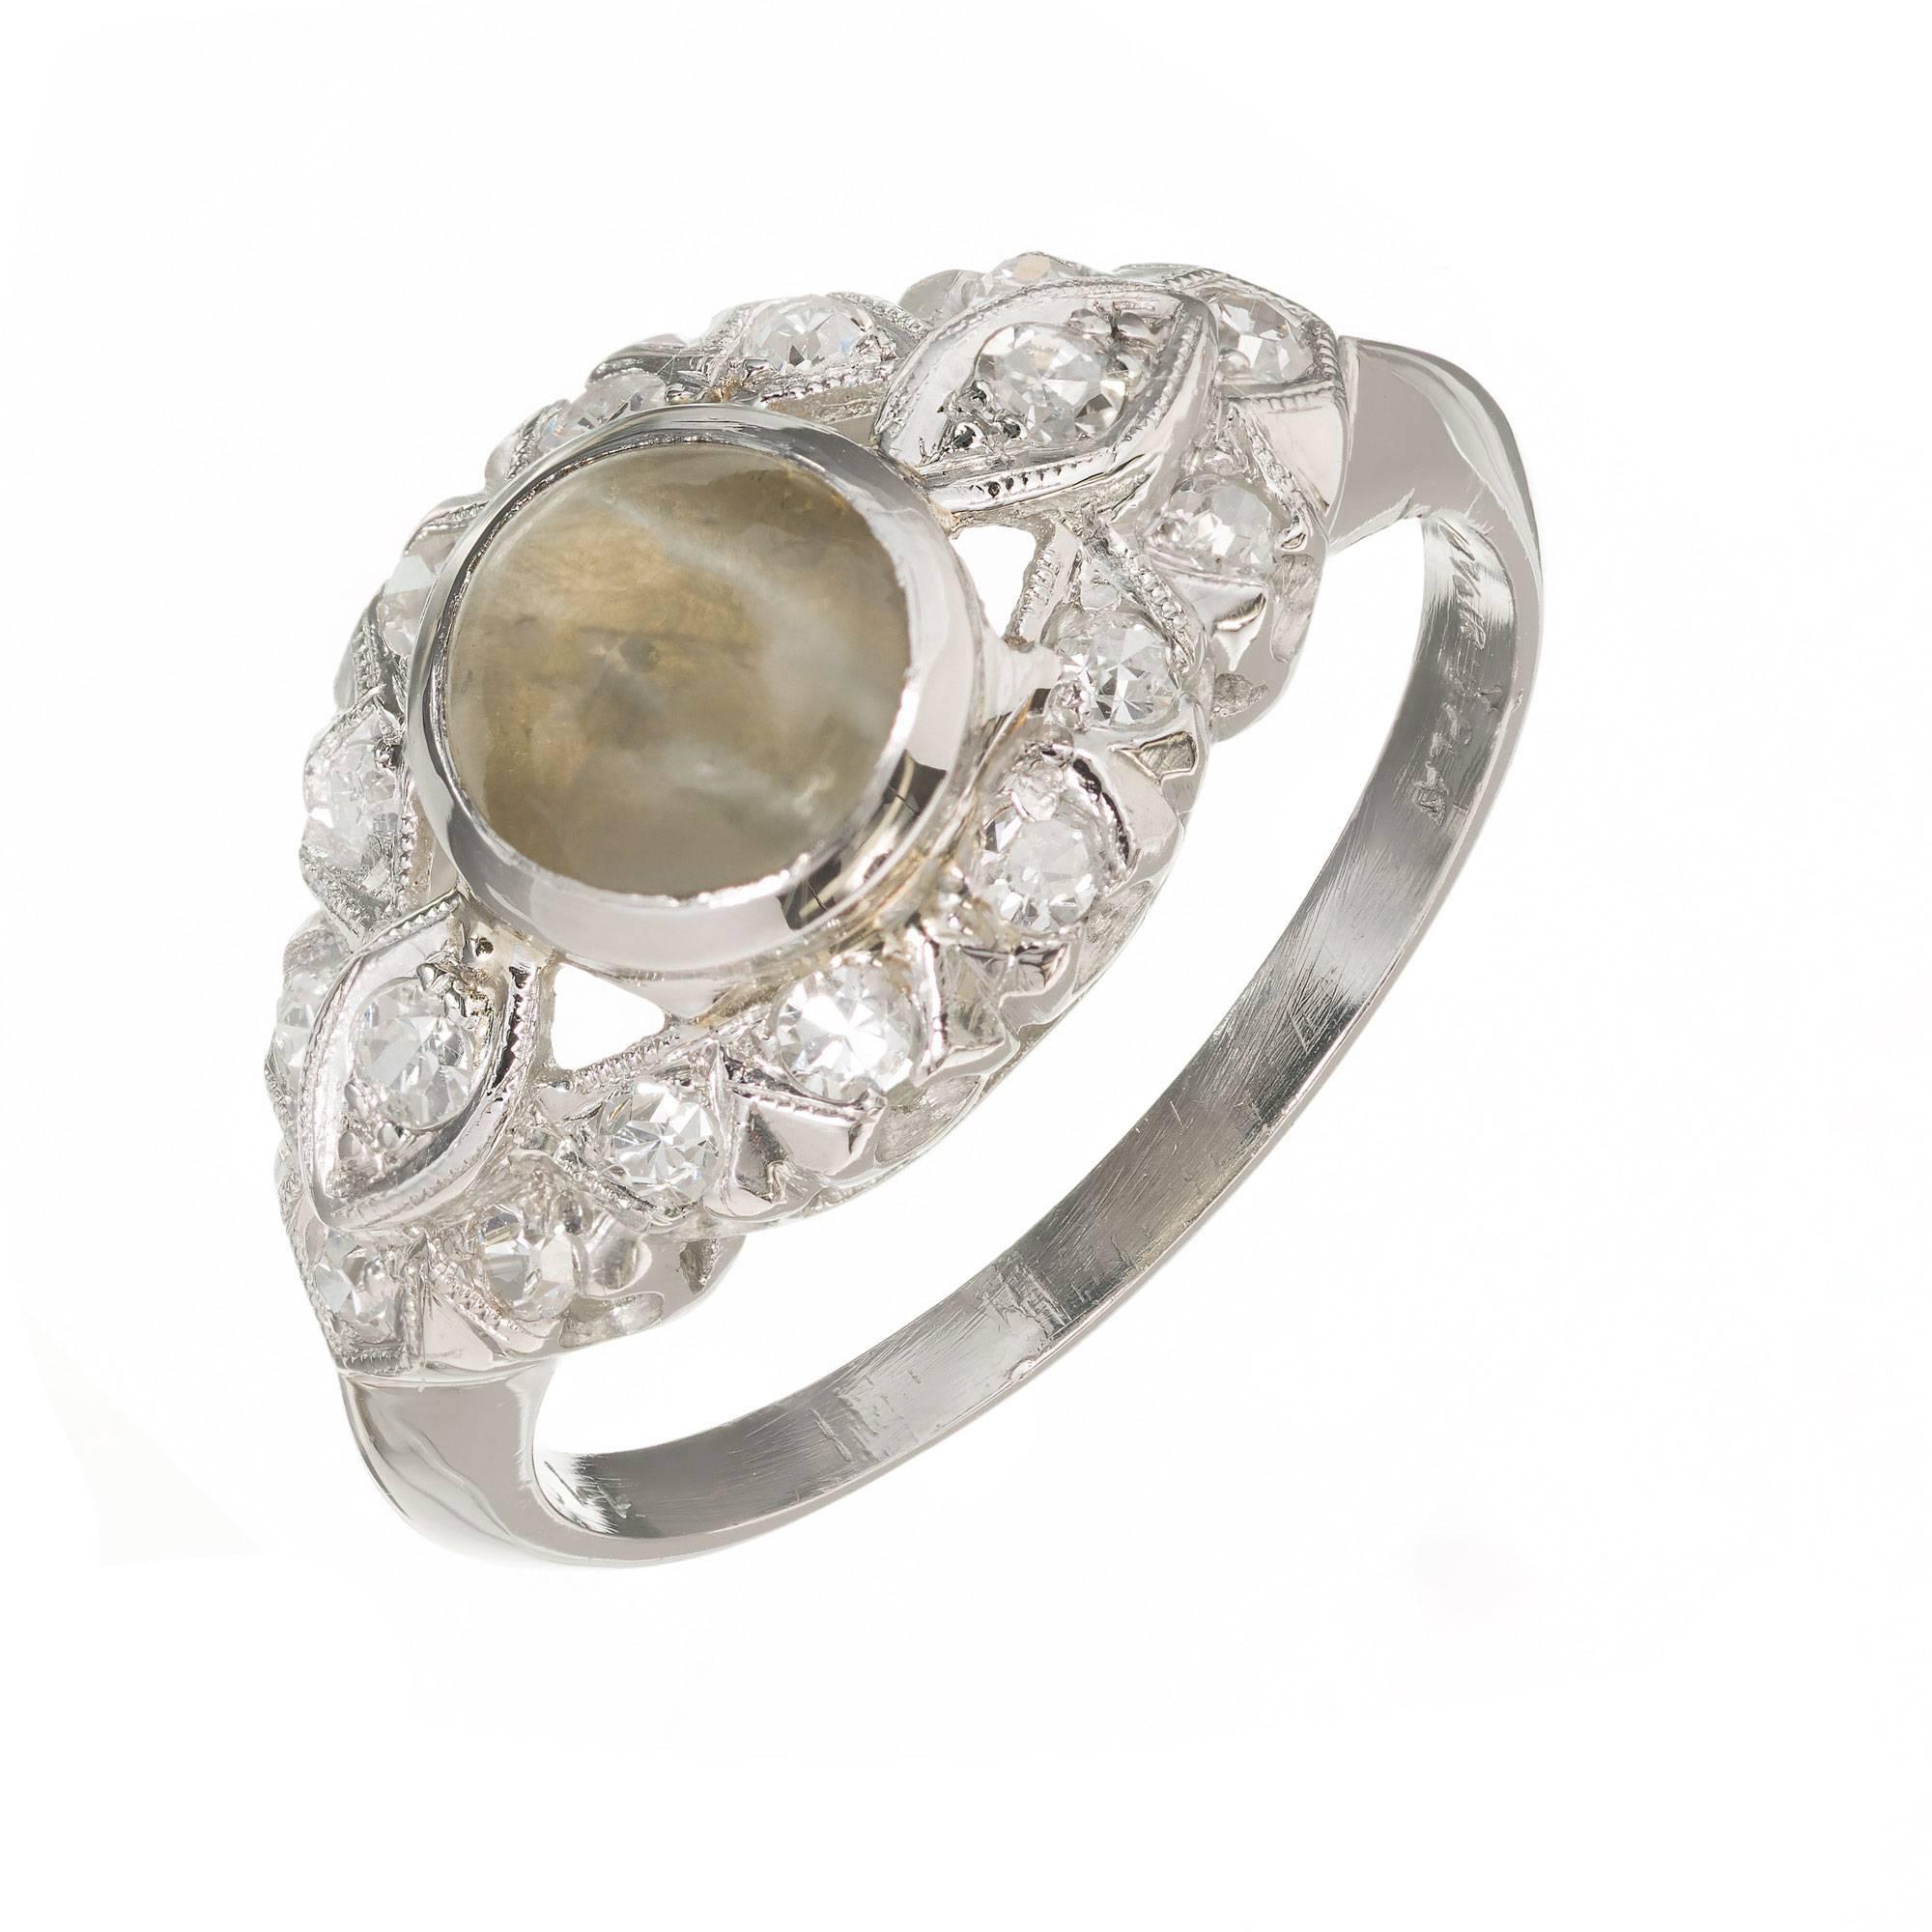 1920’s Art Deco diamond and chrysoberyl cat’s eye open work ring. Round chrysoberyl cats eye center stone with 16 round accent diamonds in a handmade platinum setting. 

1 round cabochon cut Chrysoberyl cat’s eye, 1.70cts
16 round diamonds approx.